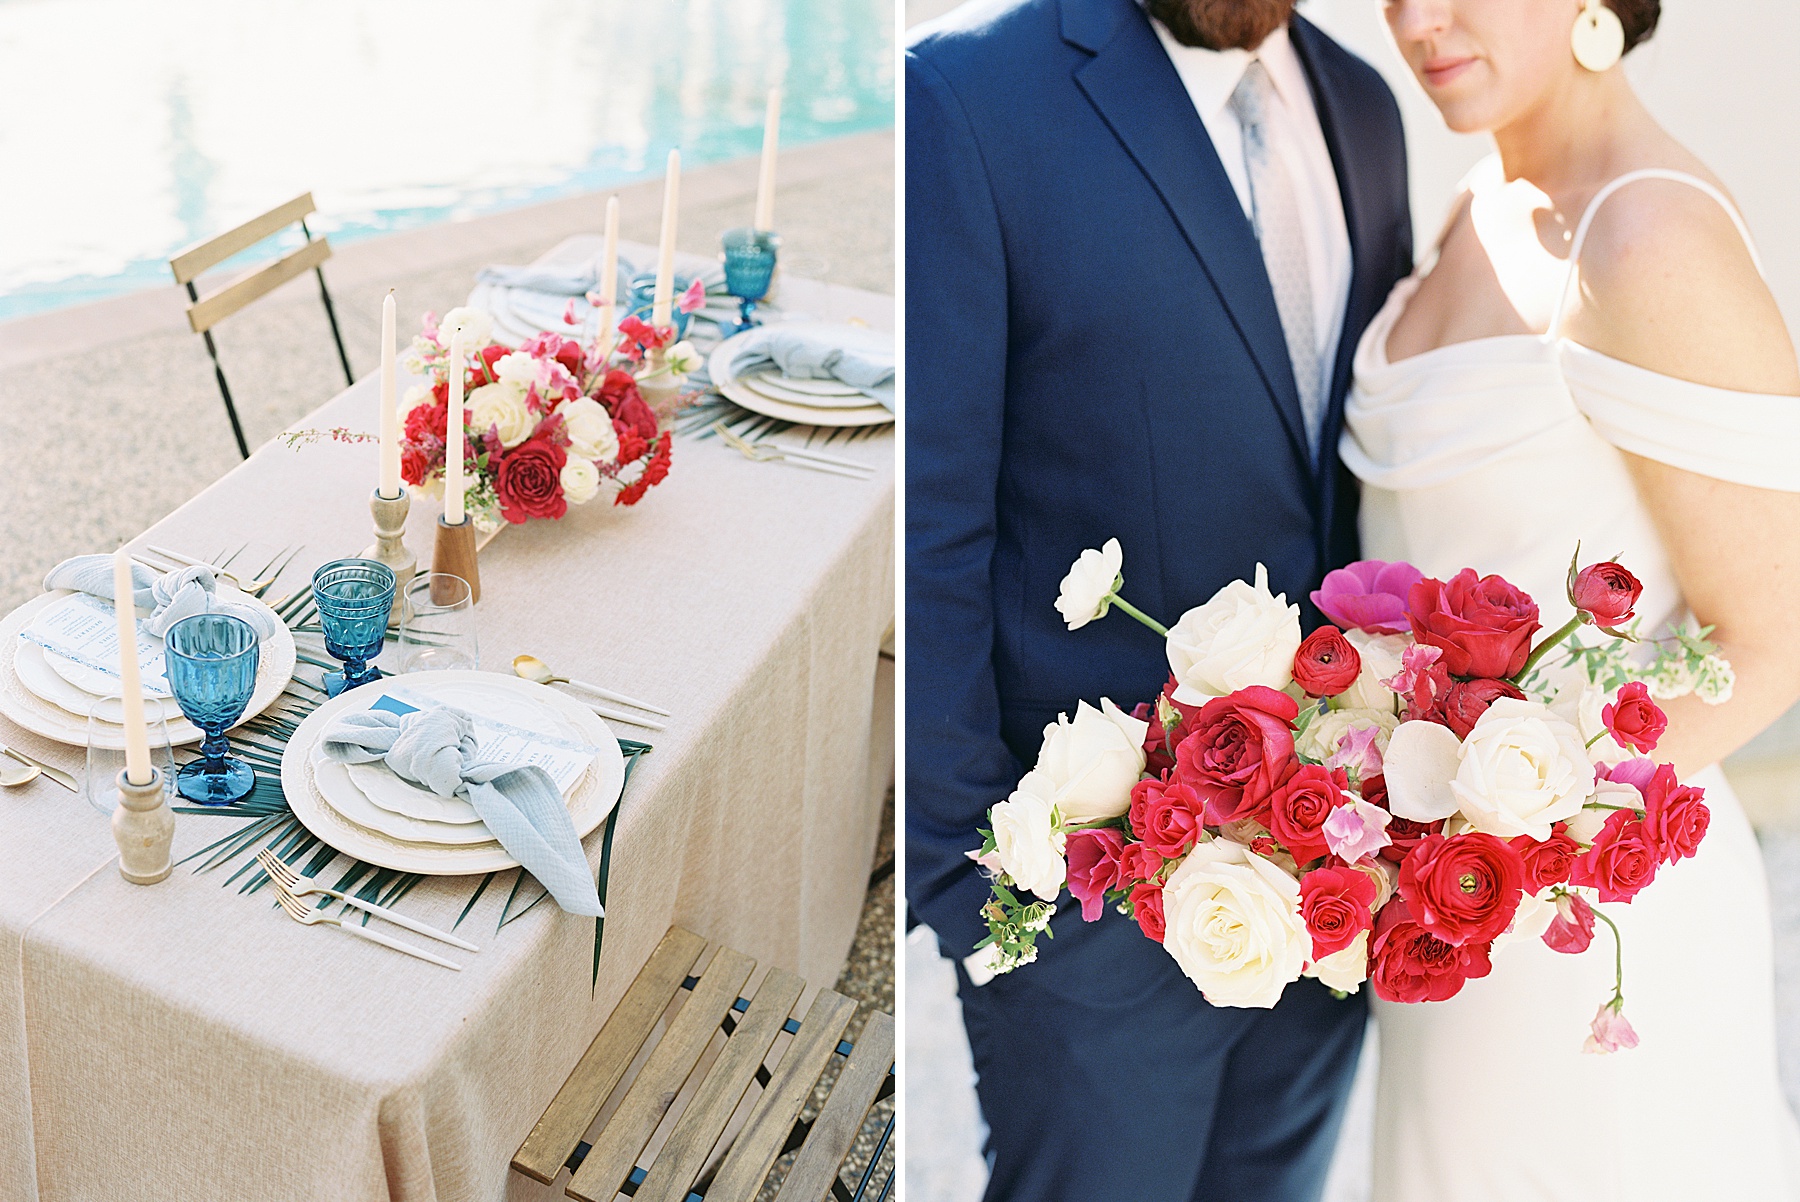 Grecian Inspired Micro-Wedding with Events by Kristina Elyse - Ash Baumgartner - Inspired by This - Sonoma Wedding Photographer_0011.jpg